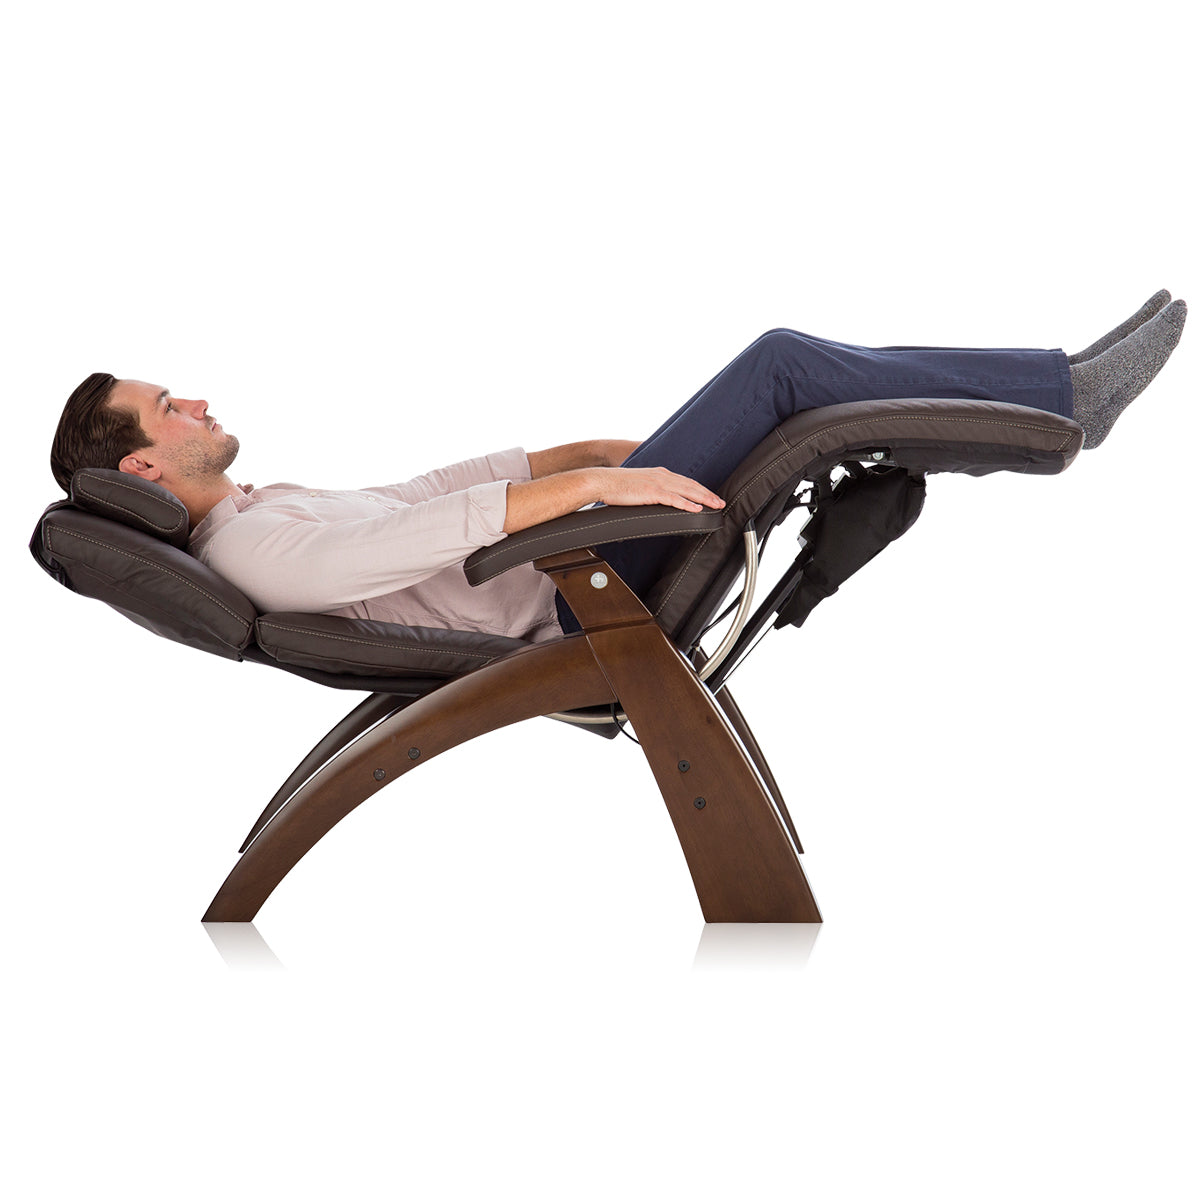 Relax The Back: Relax in Zero Gravity Comfort